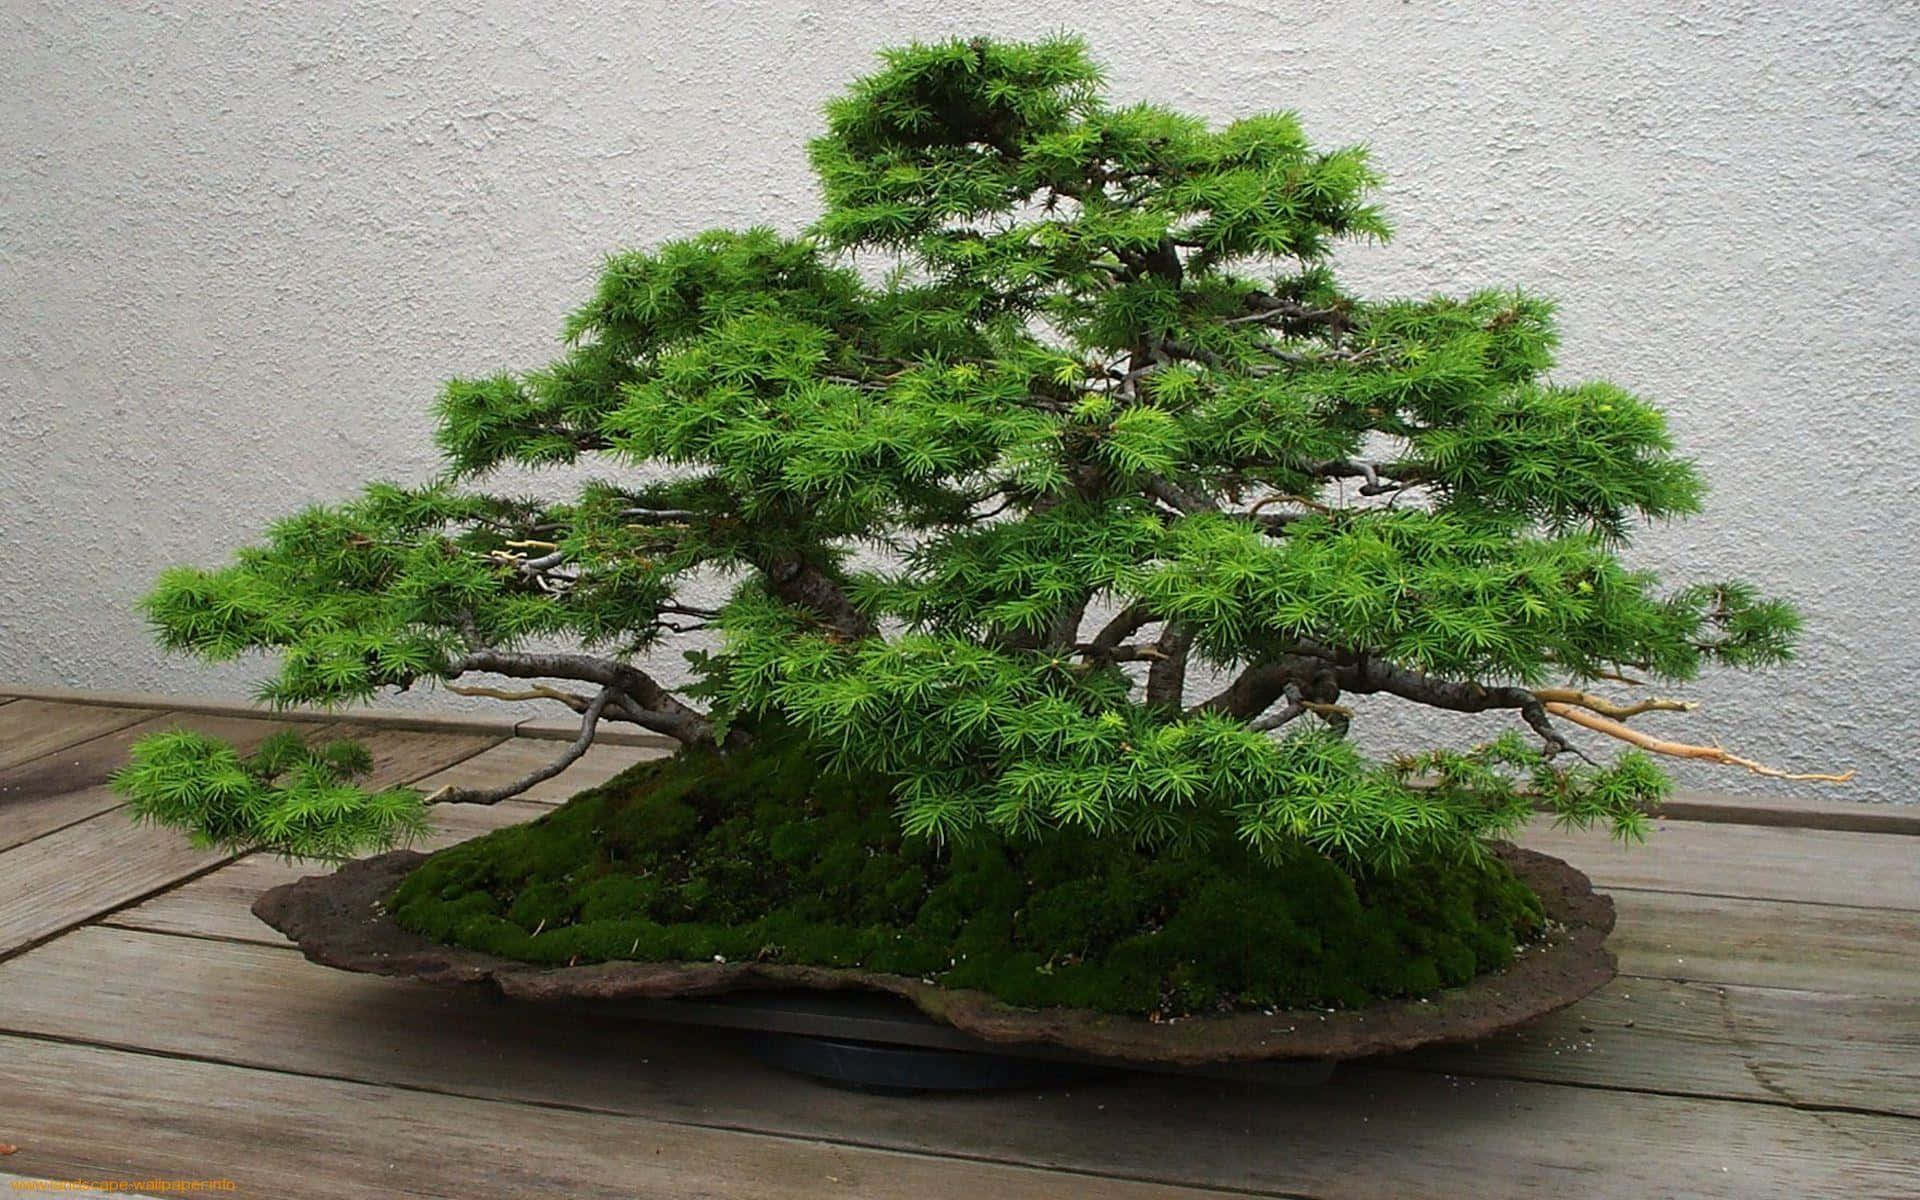 A Bonsai Tree Is Sitting On A Wooden Table